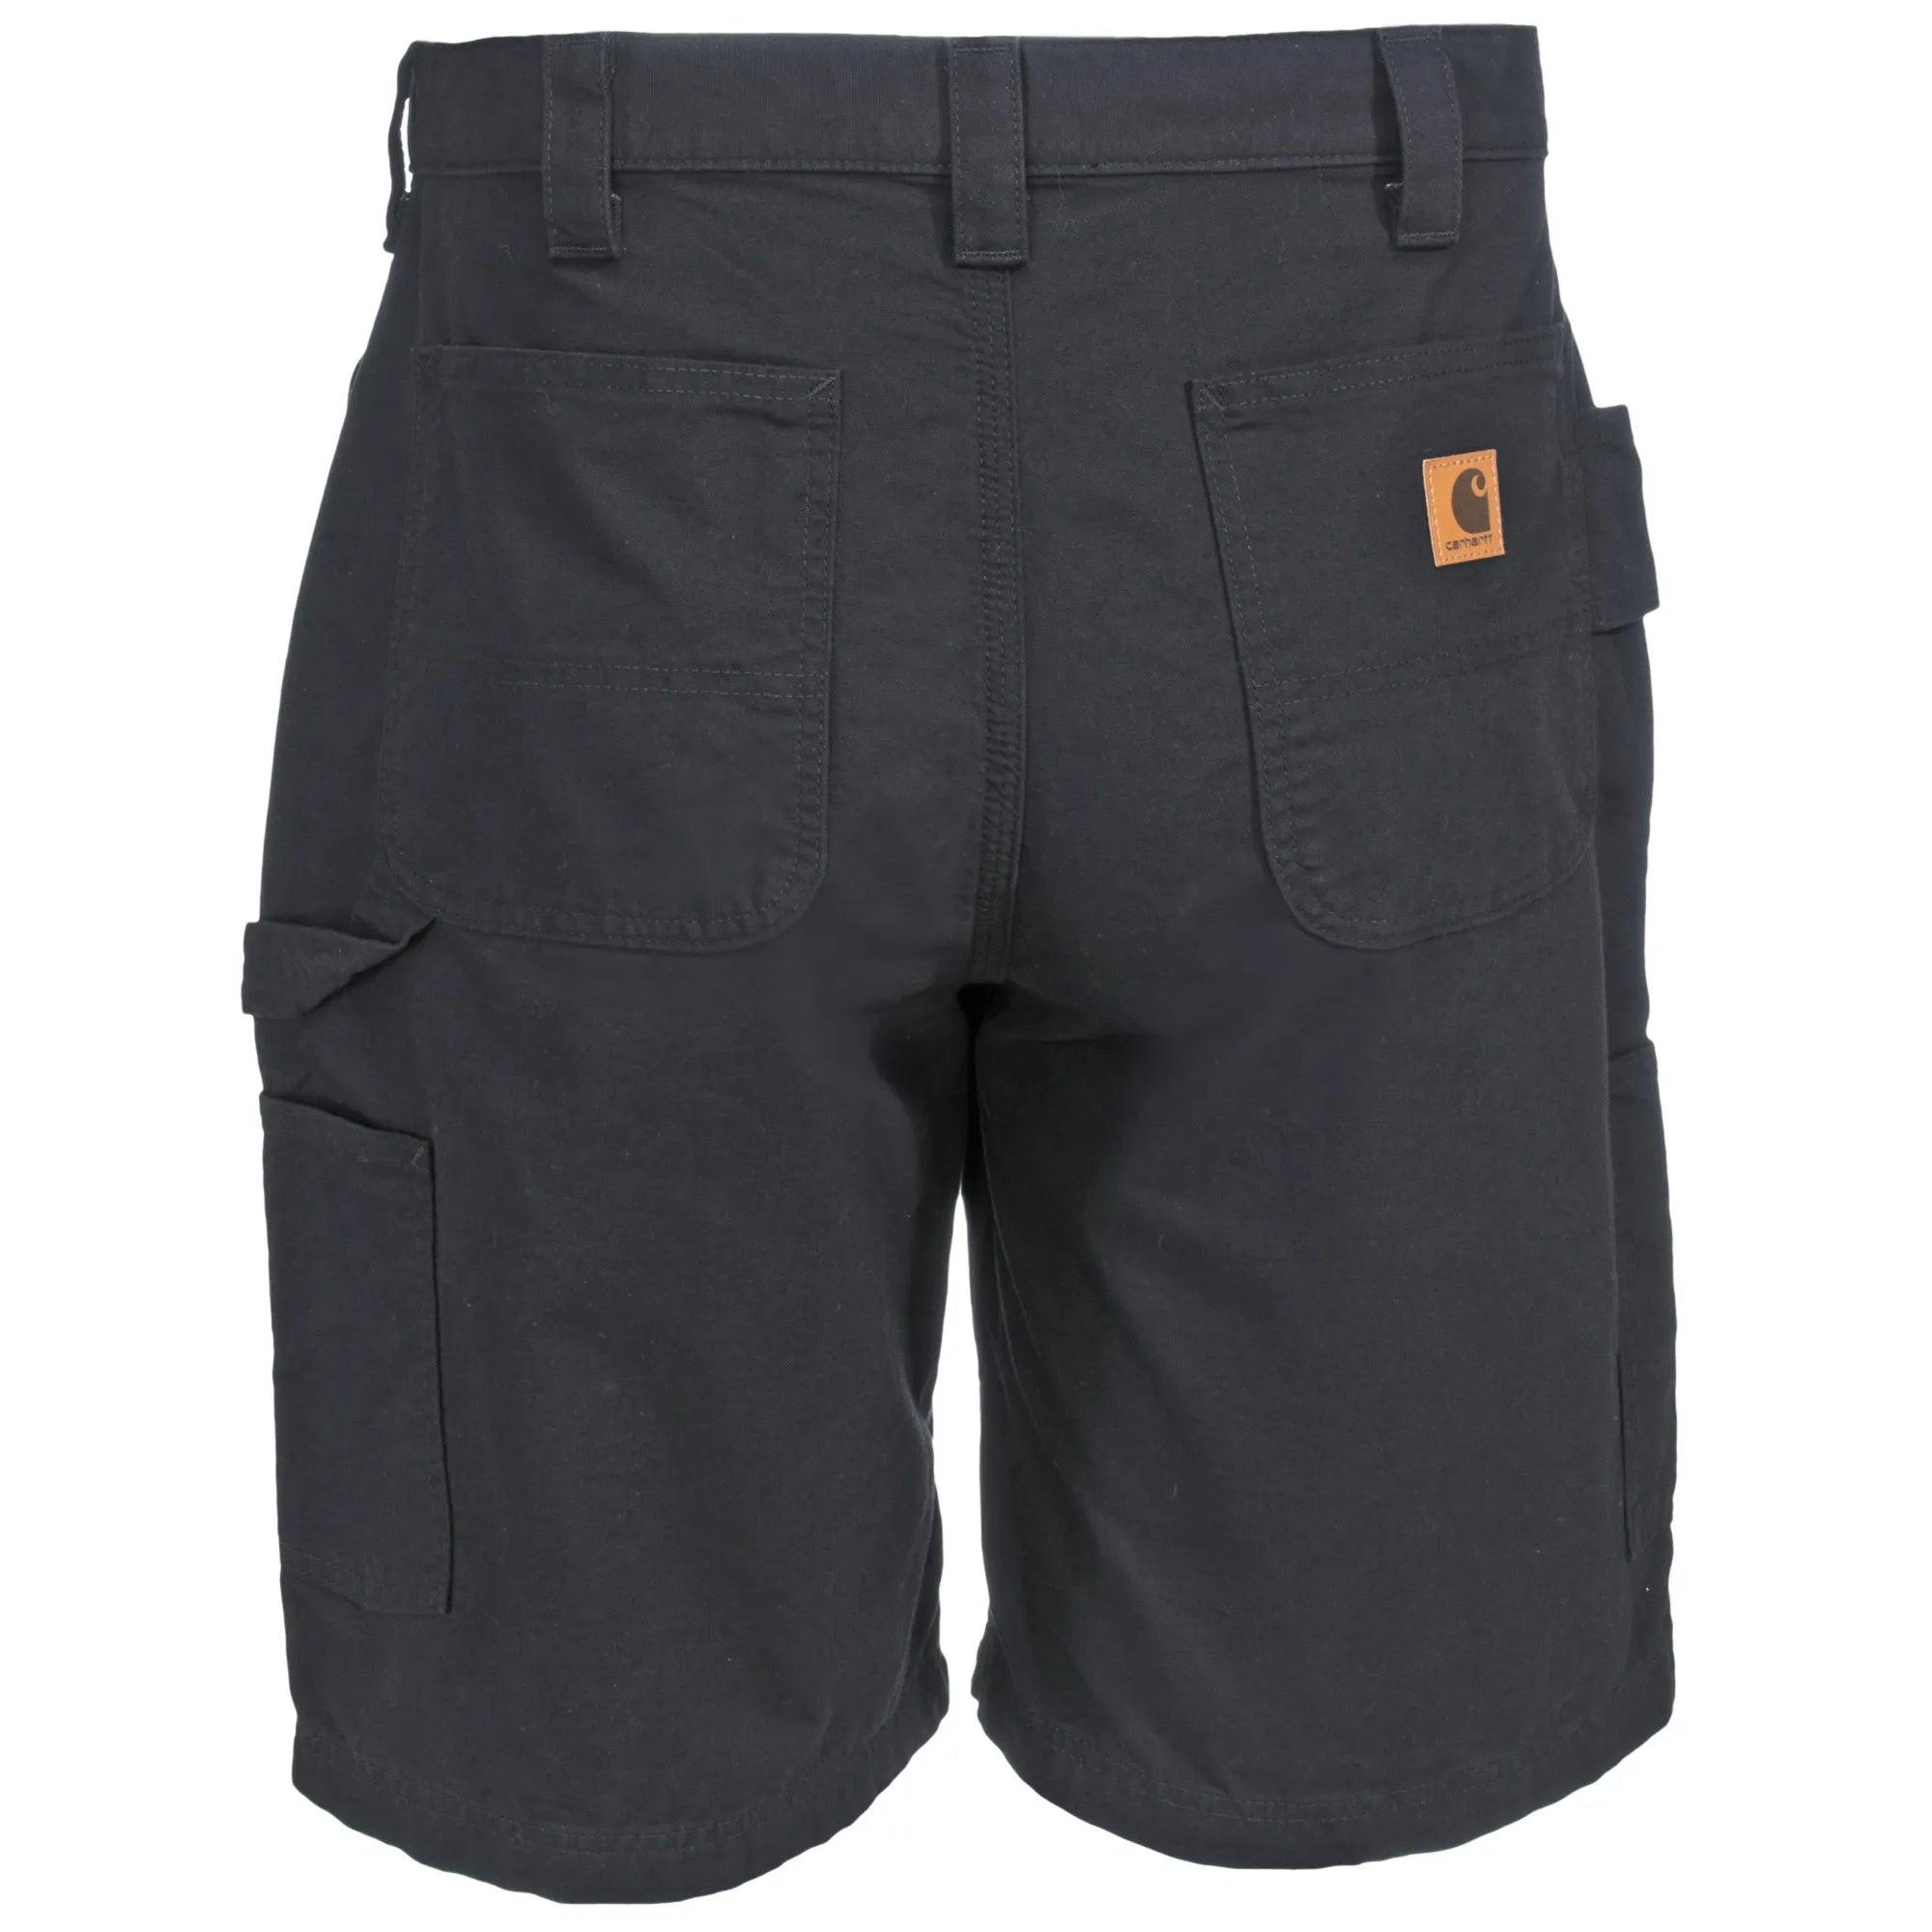 Canvas Work Short - Black - Purpose-Built / Home of the Trades